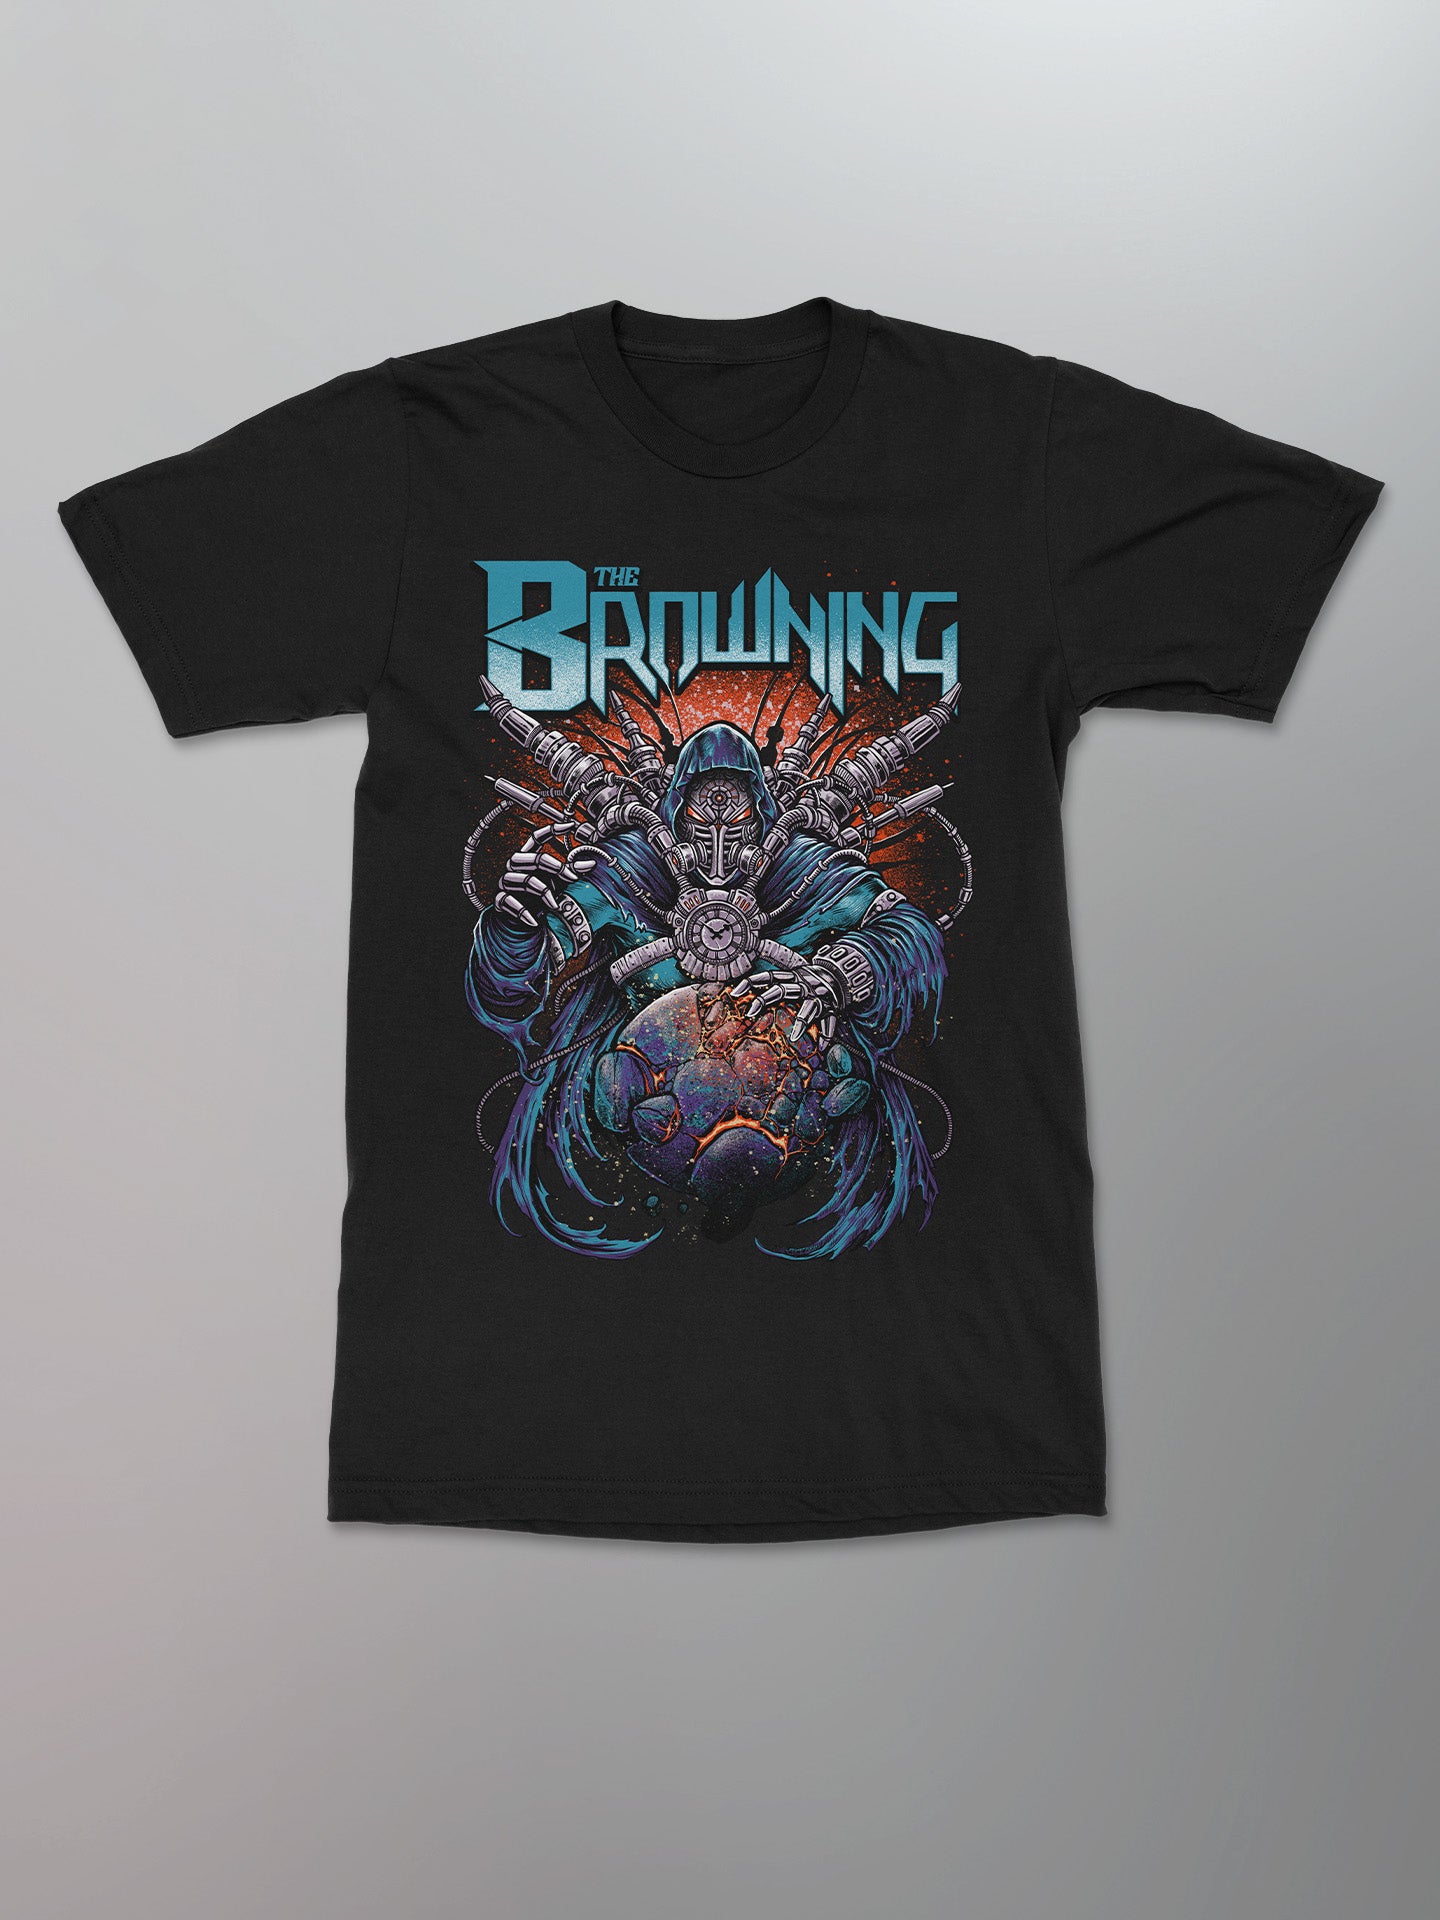 The Browning - Eater of Worlds Shirt